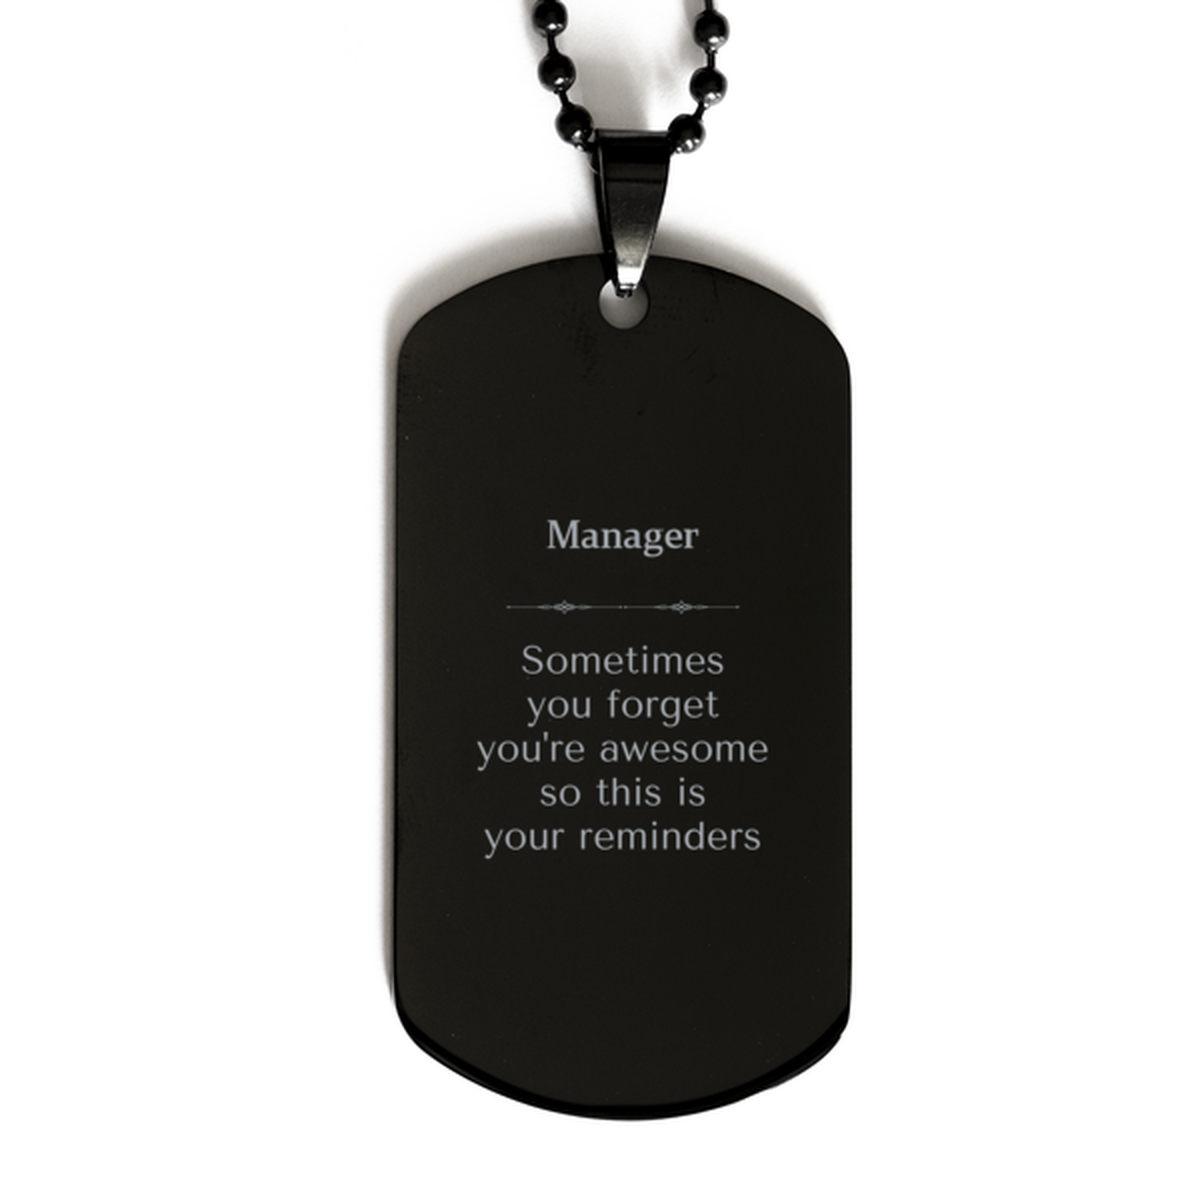 Sentimental Manager Black Dog Tag, Manager Sometimes you forget you're awesome so this is your reminders, Graduation Christmas Birthday Gifts for Manager, Men, Women, Coworkers